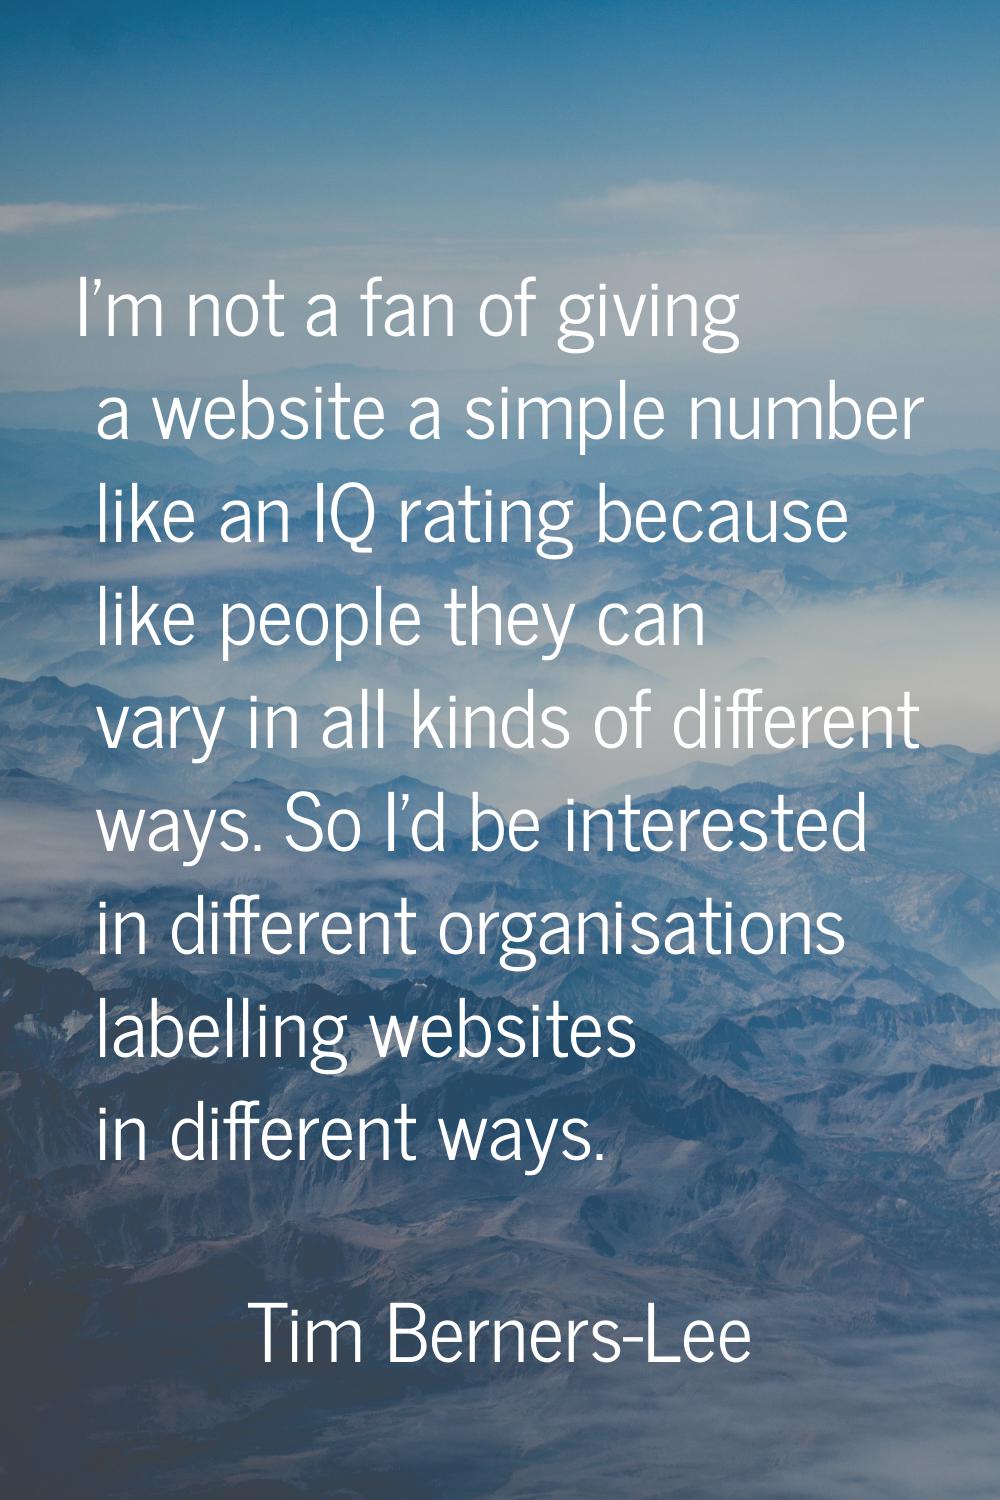 I'm not a fan of giving a website a simple number like an IQ rating because like people they can va